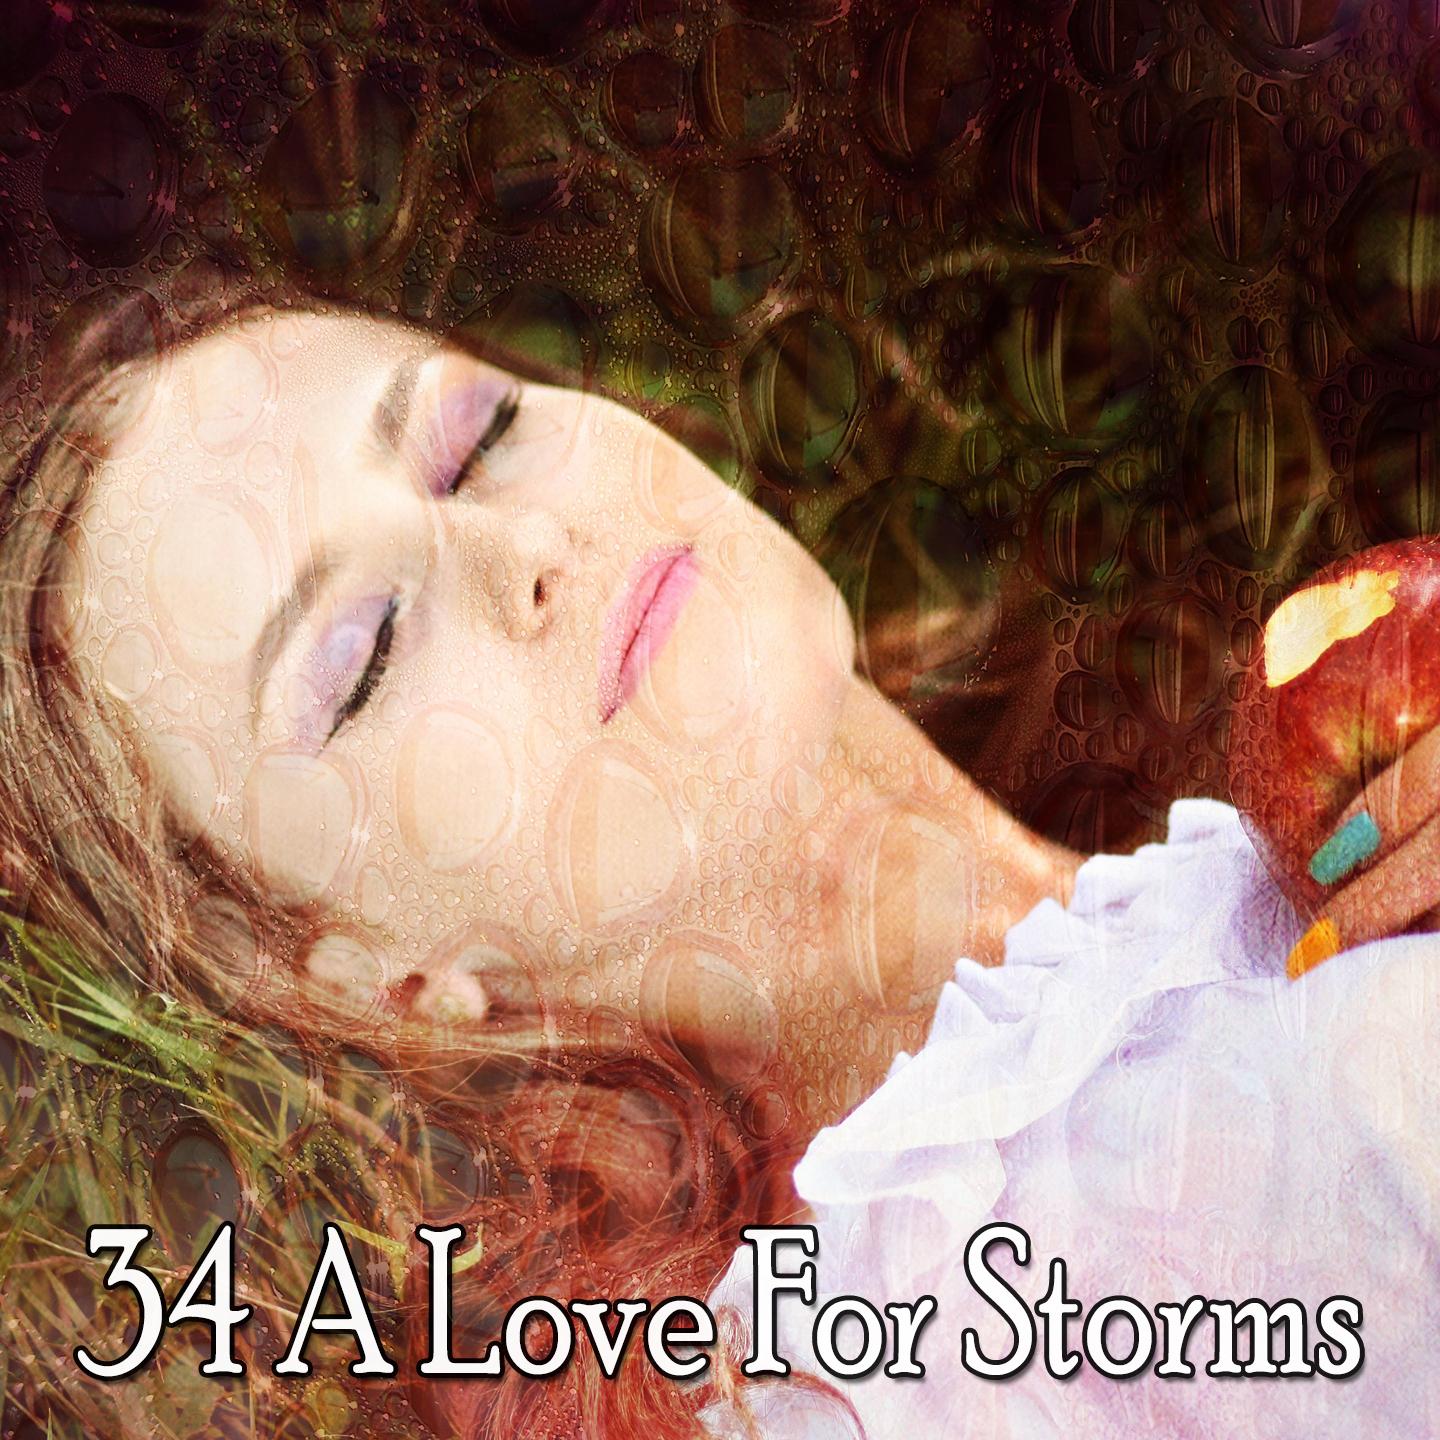 34 A Love for Storms